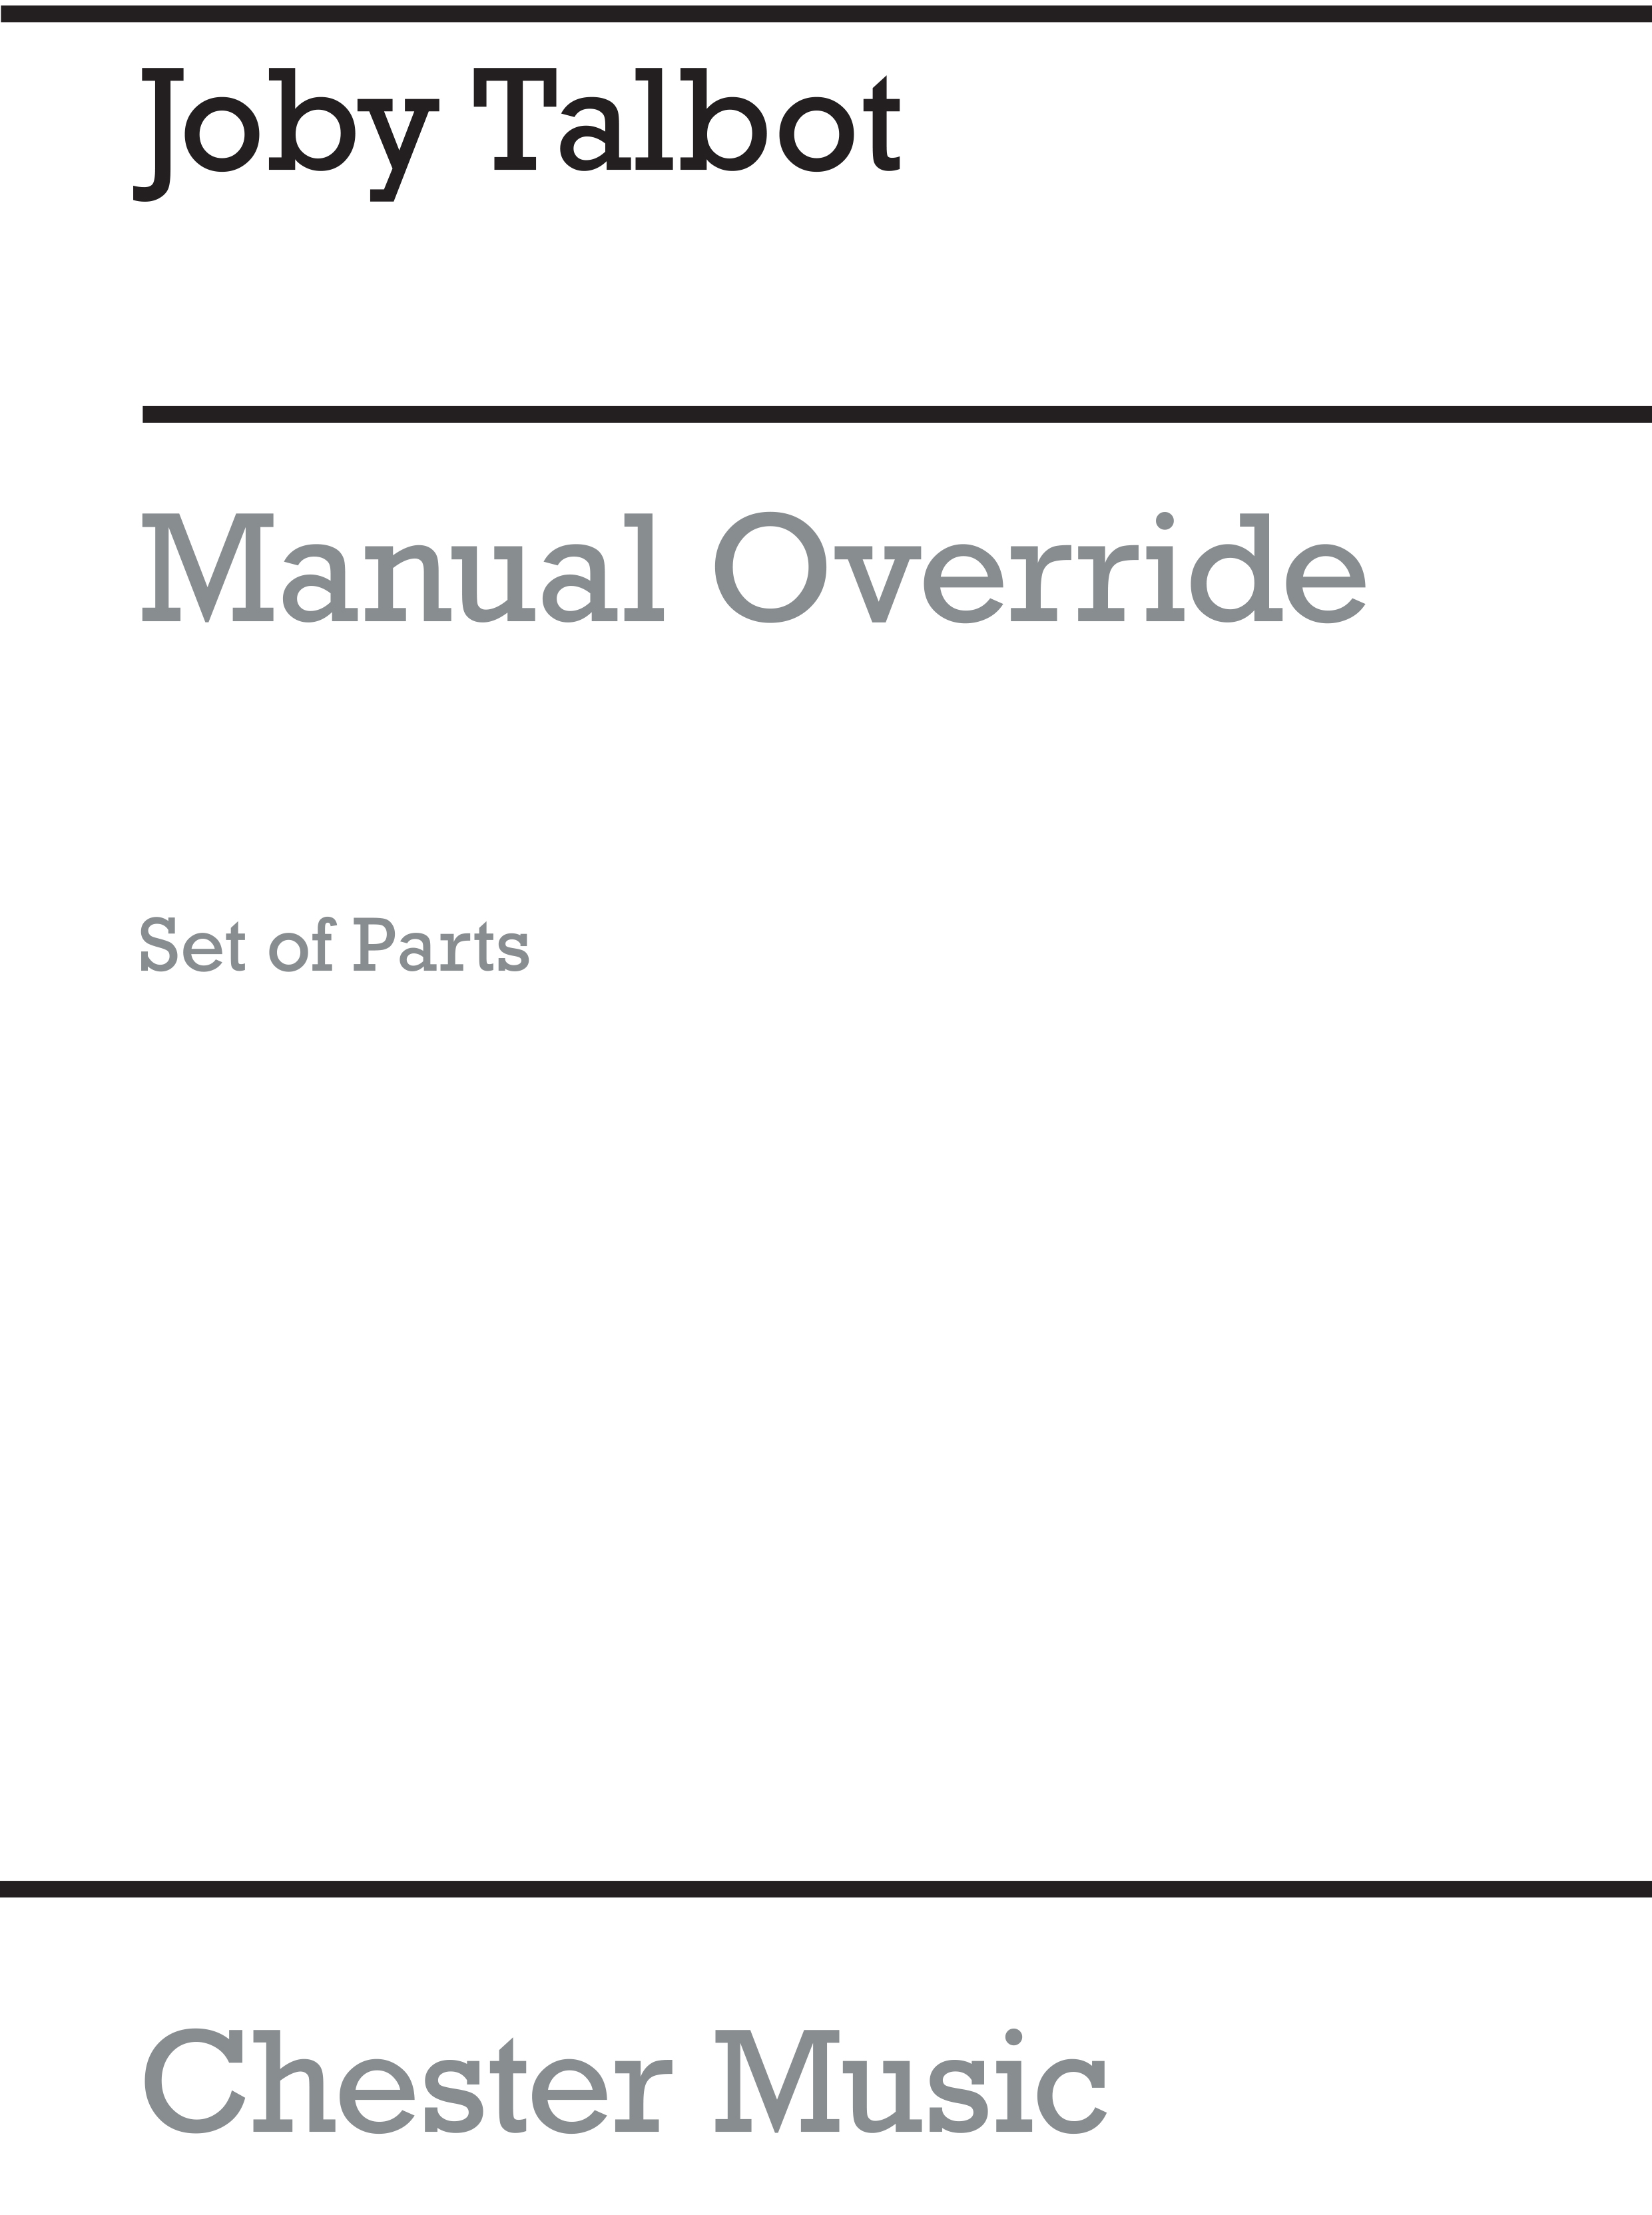 Joby Talbot: Manual Override (Parts)